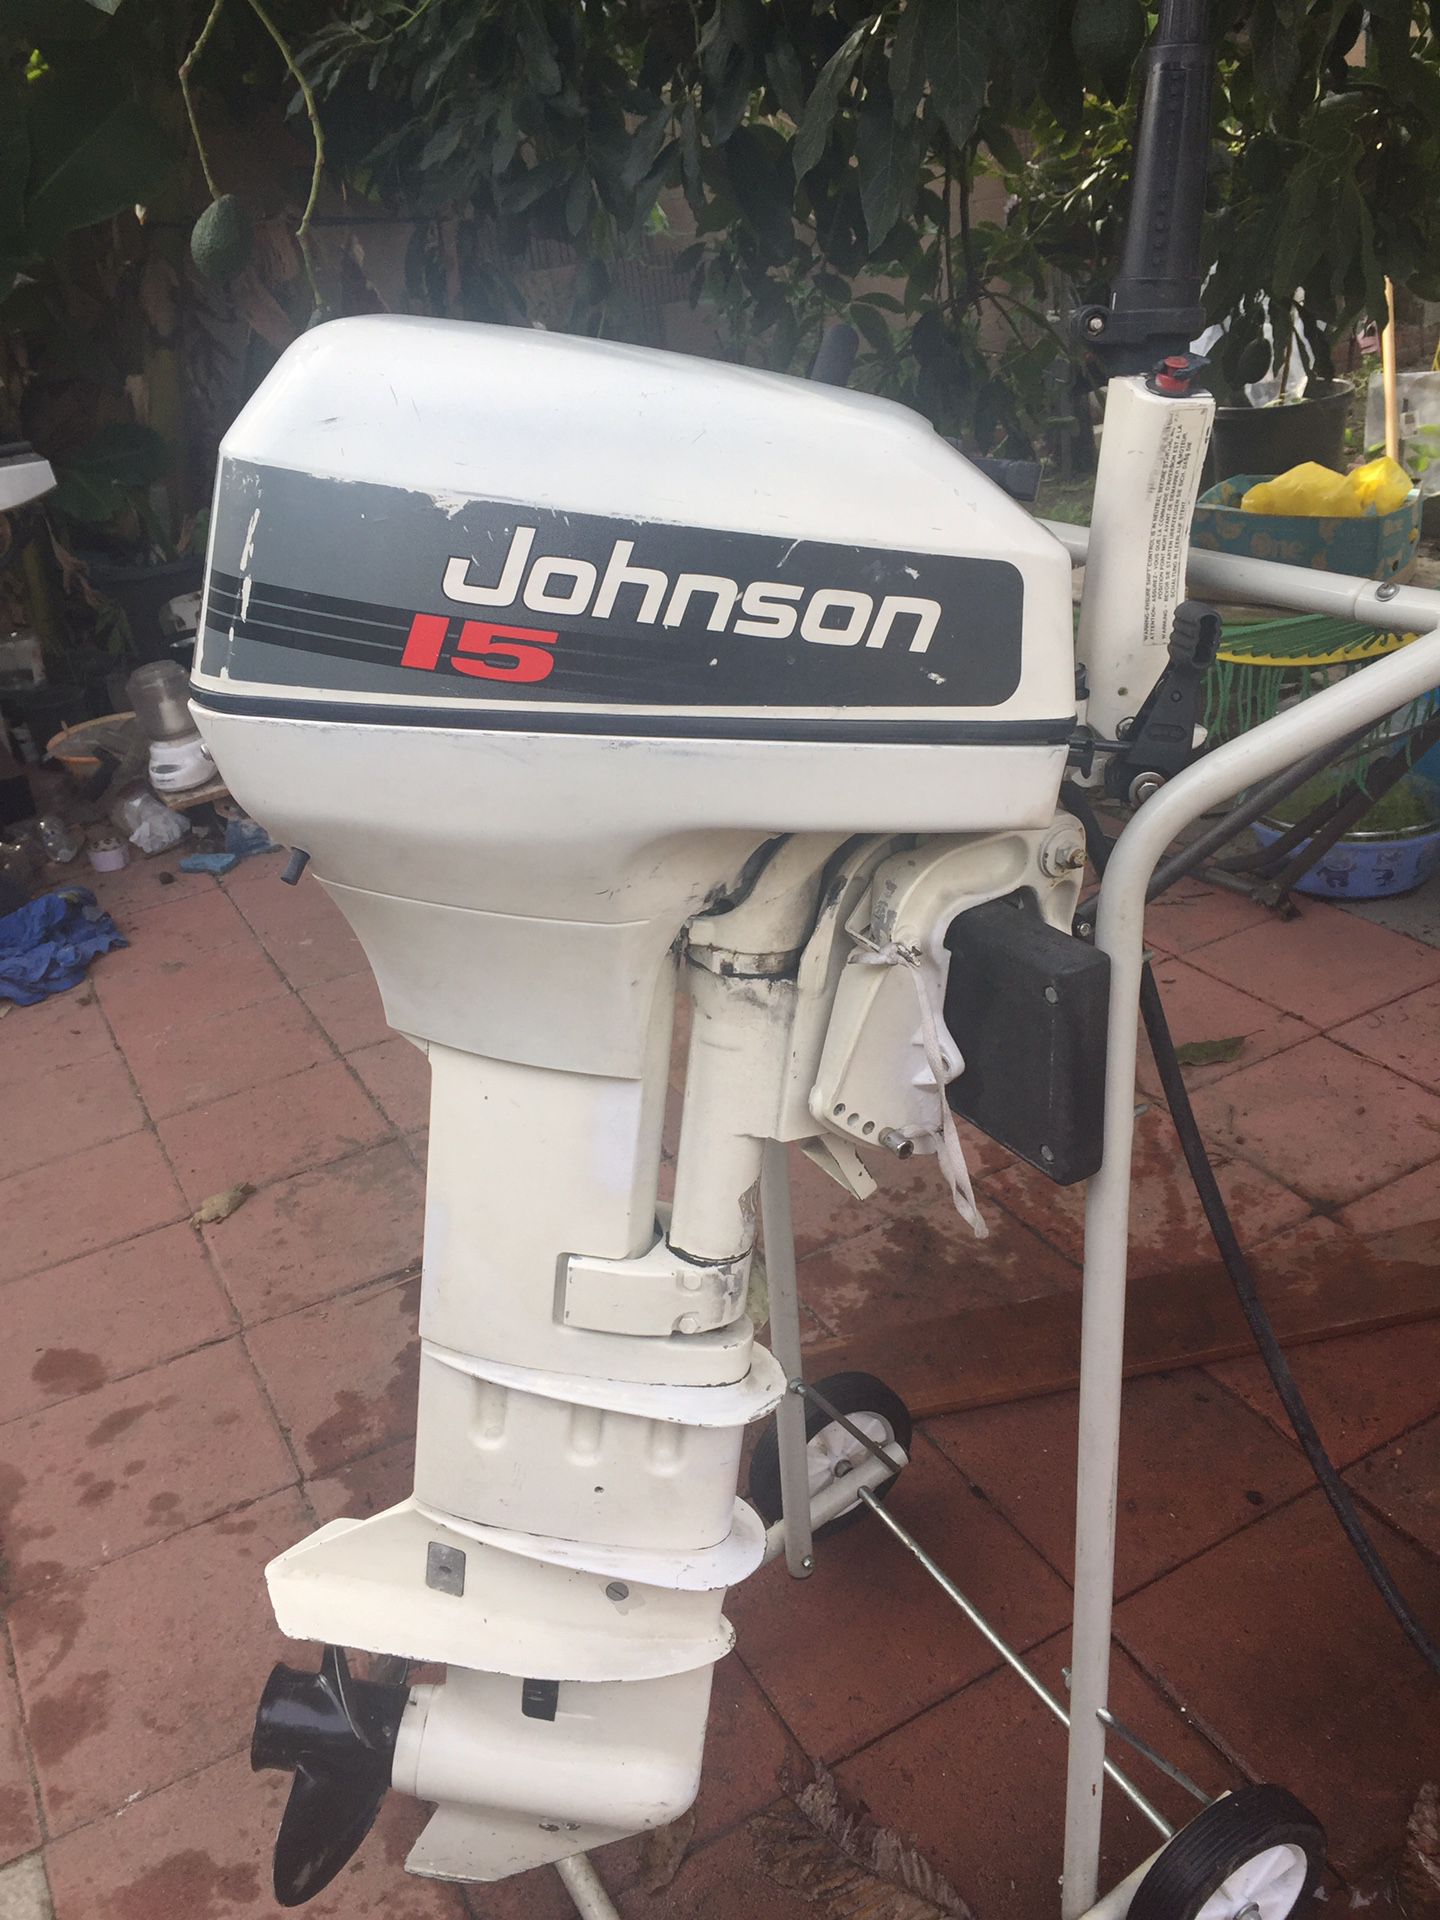 $400.00 Outboard motor Johnson 15 hp working condition